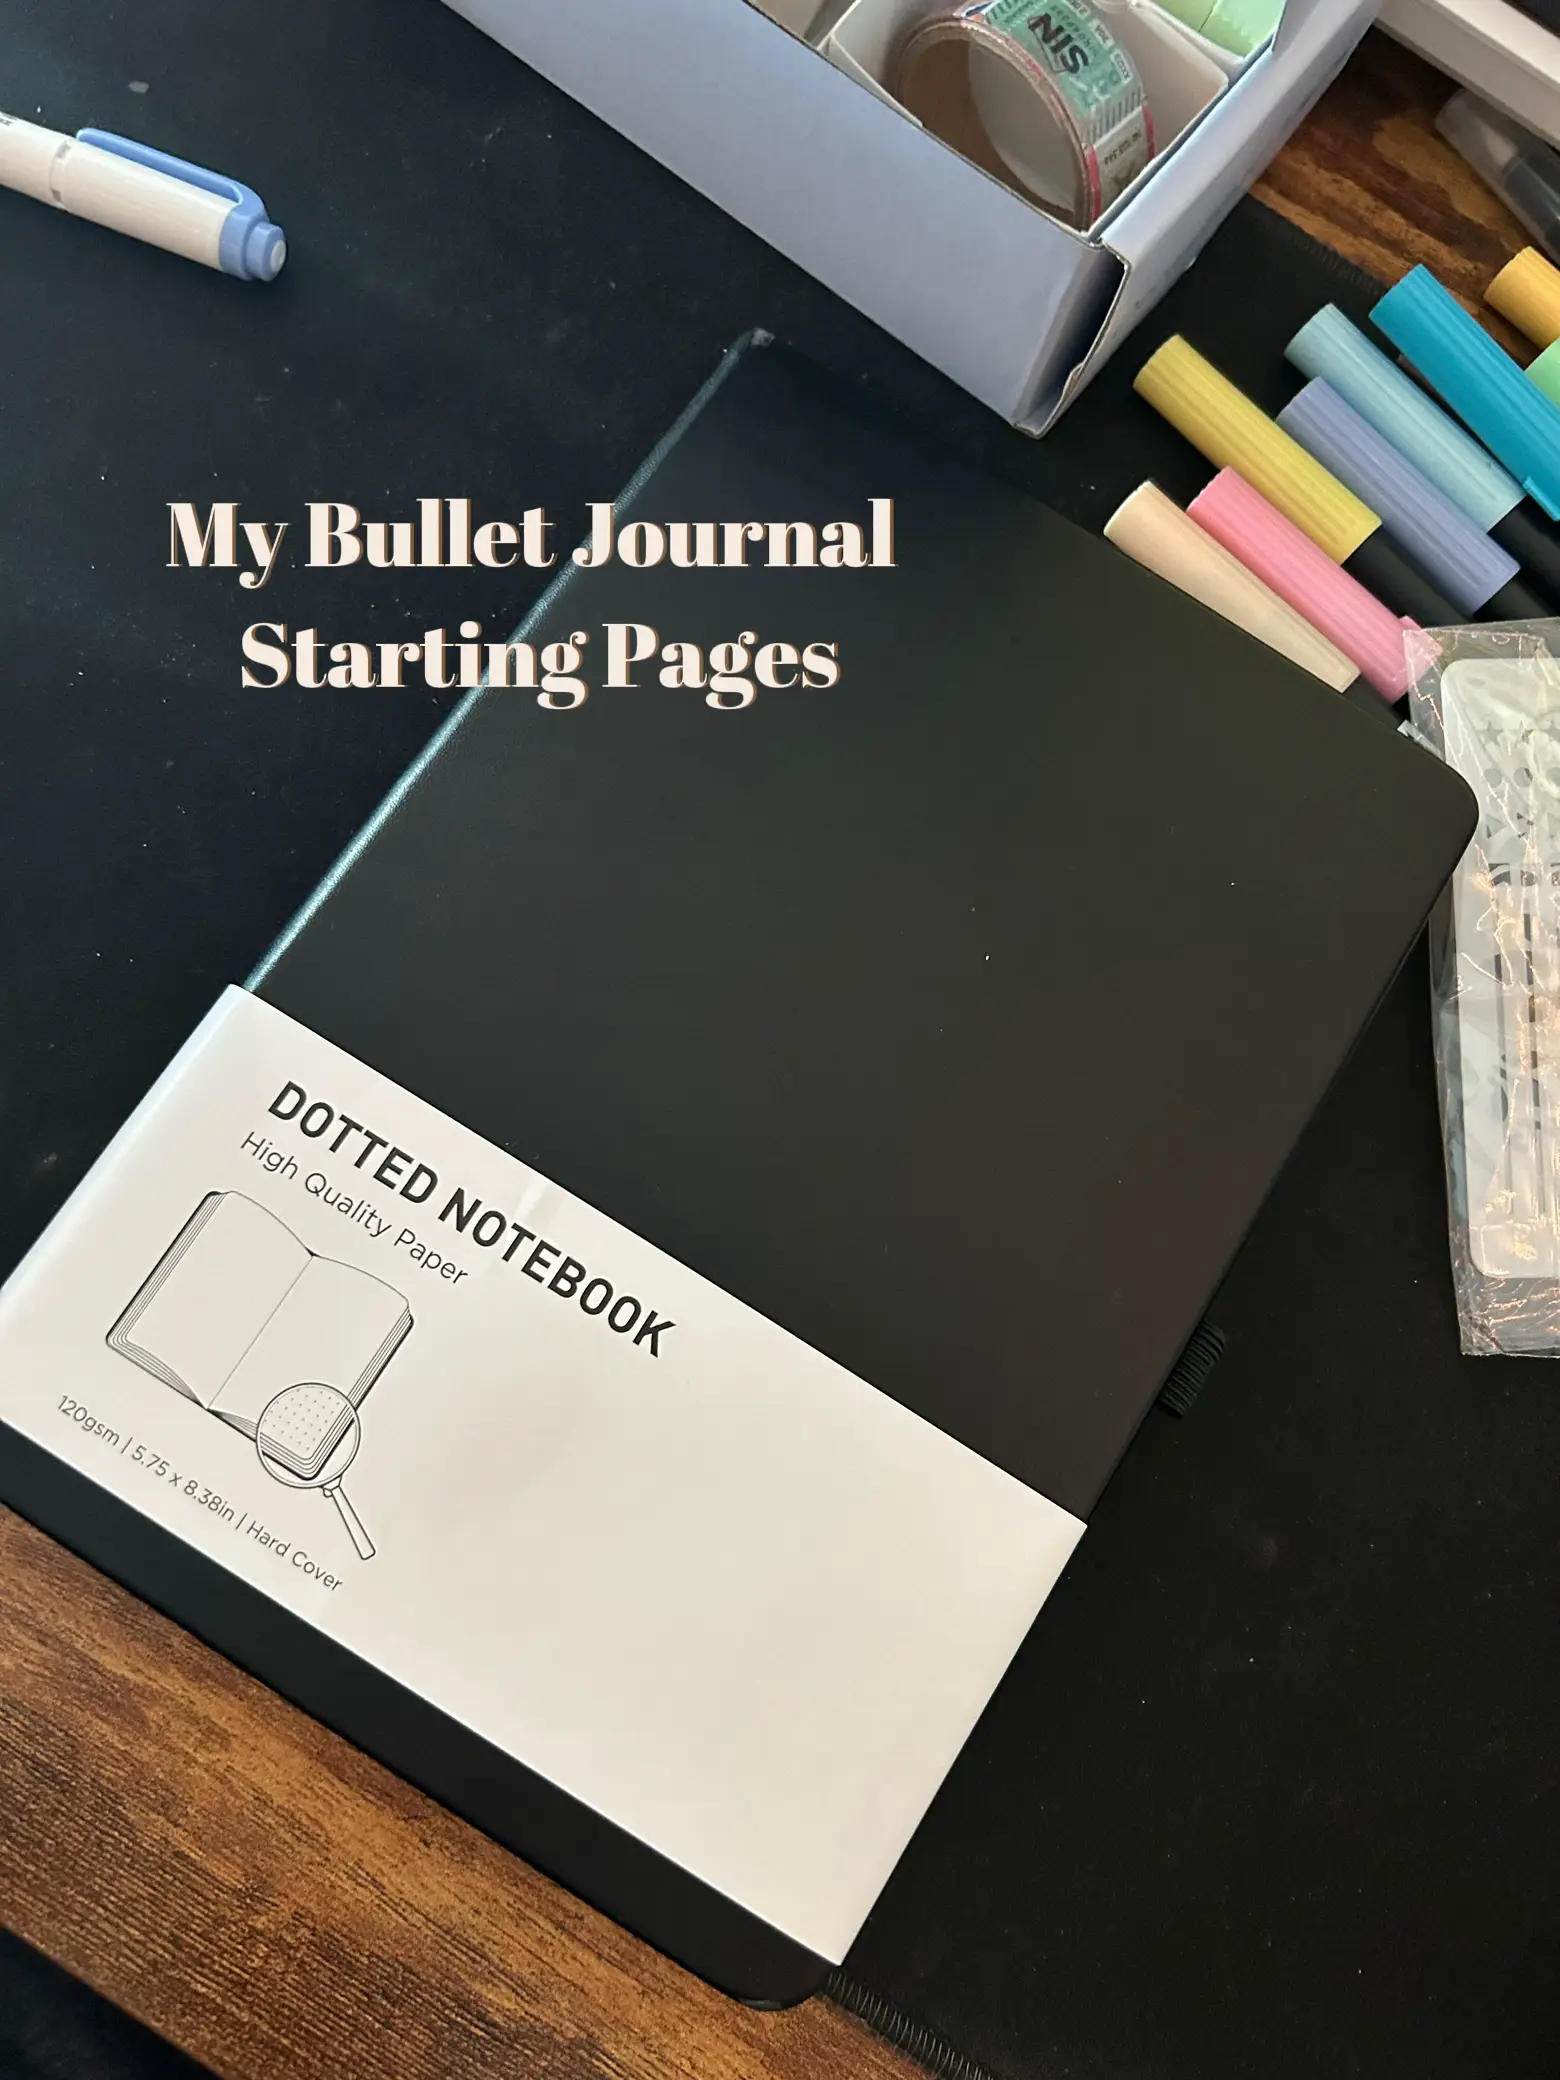 the ultimate bullet journal starter kit ⭐ essential supplies for beginners  